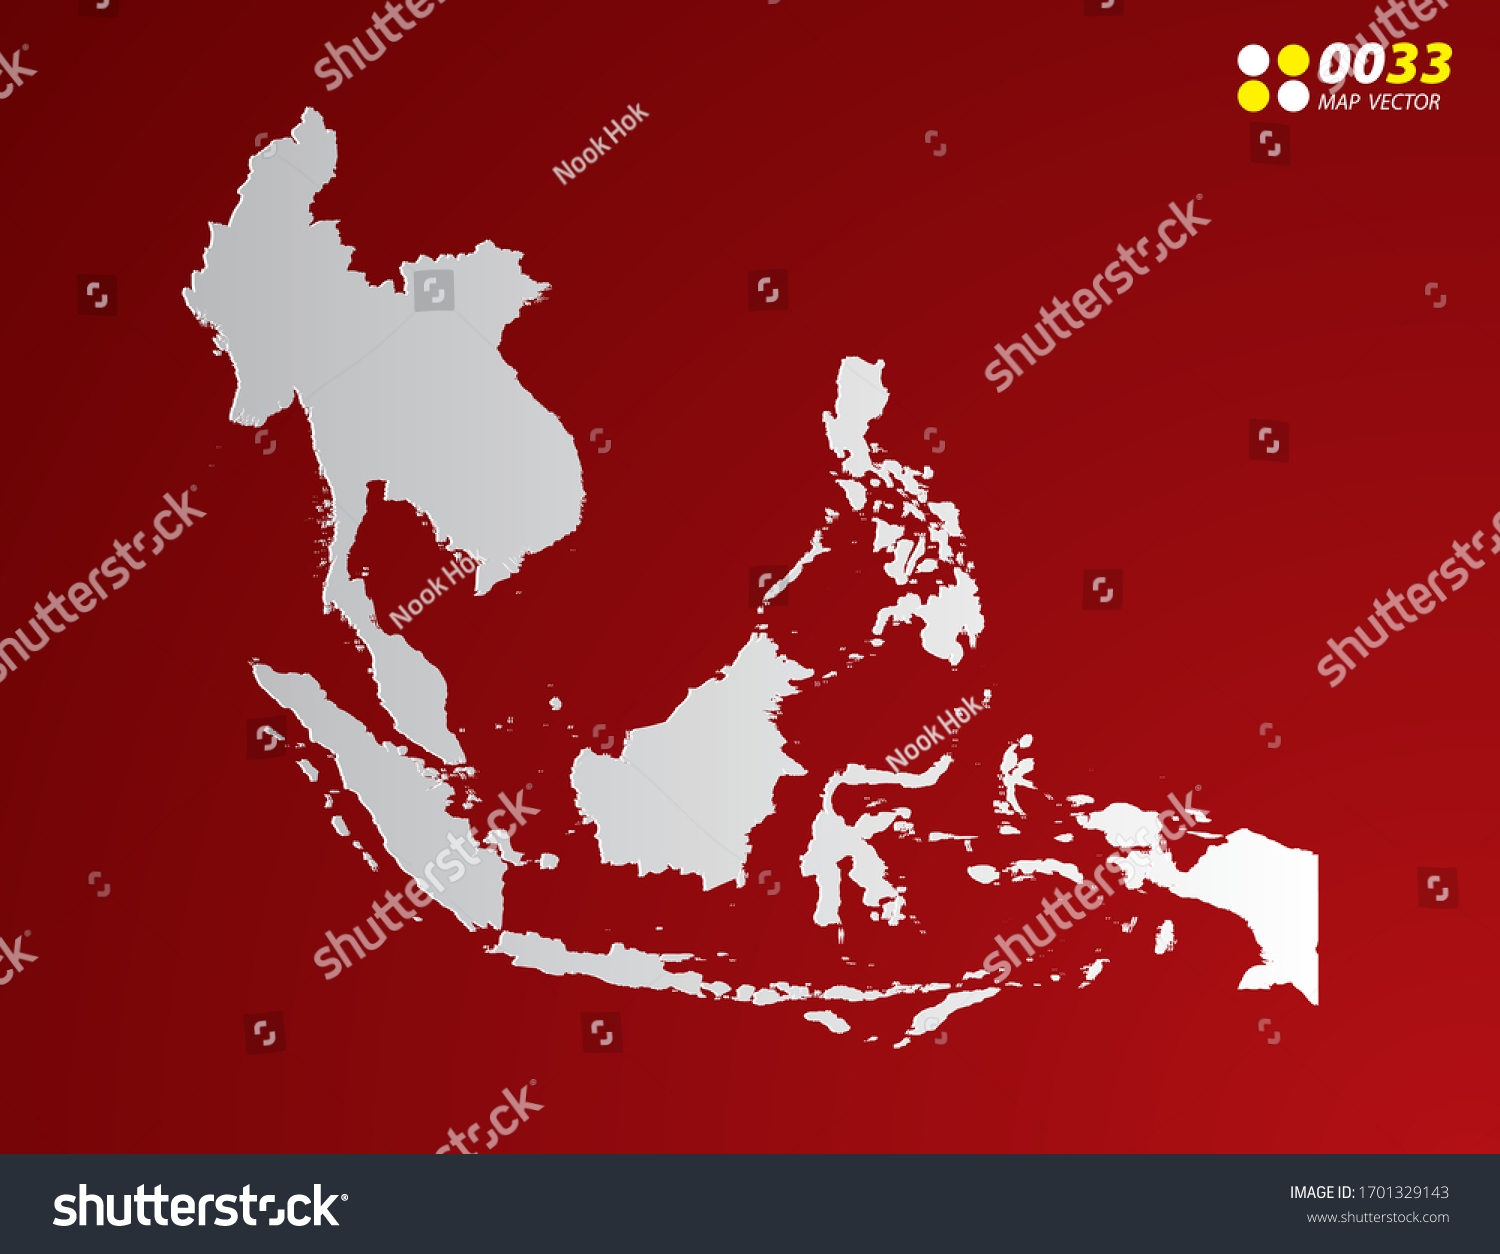 Vector Gray Gradient Southeast Asia Map Stock Vector Royalty Free 1701329143 6565